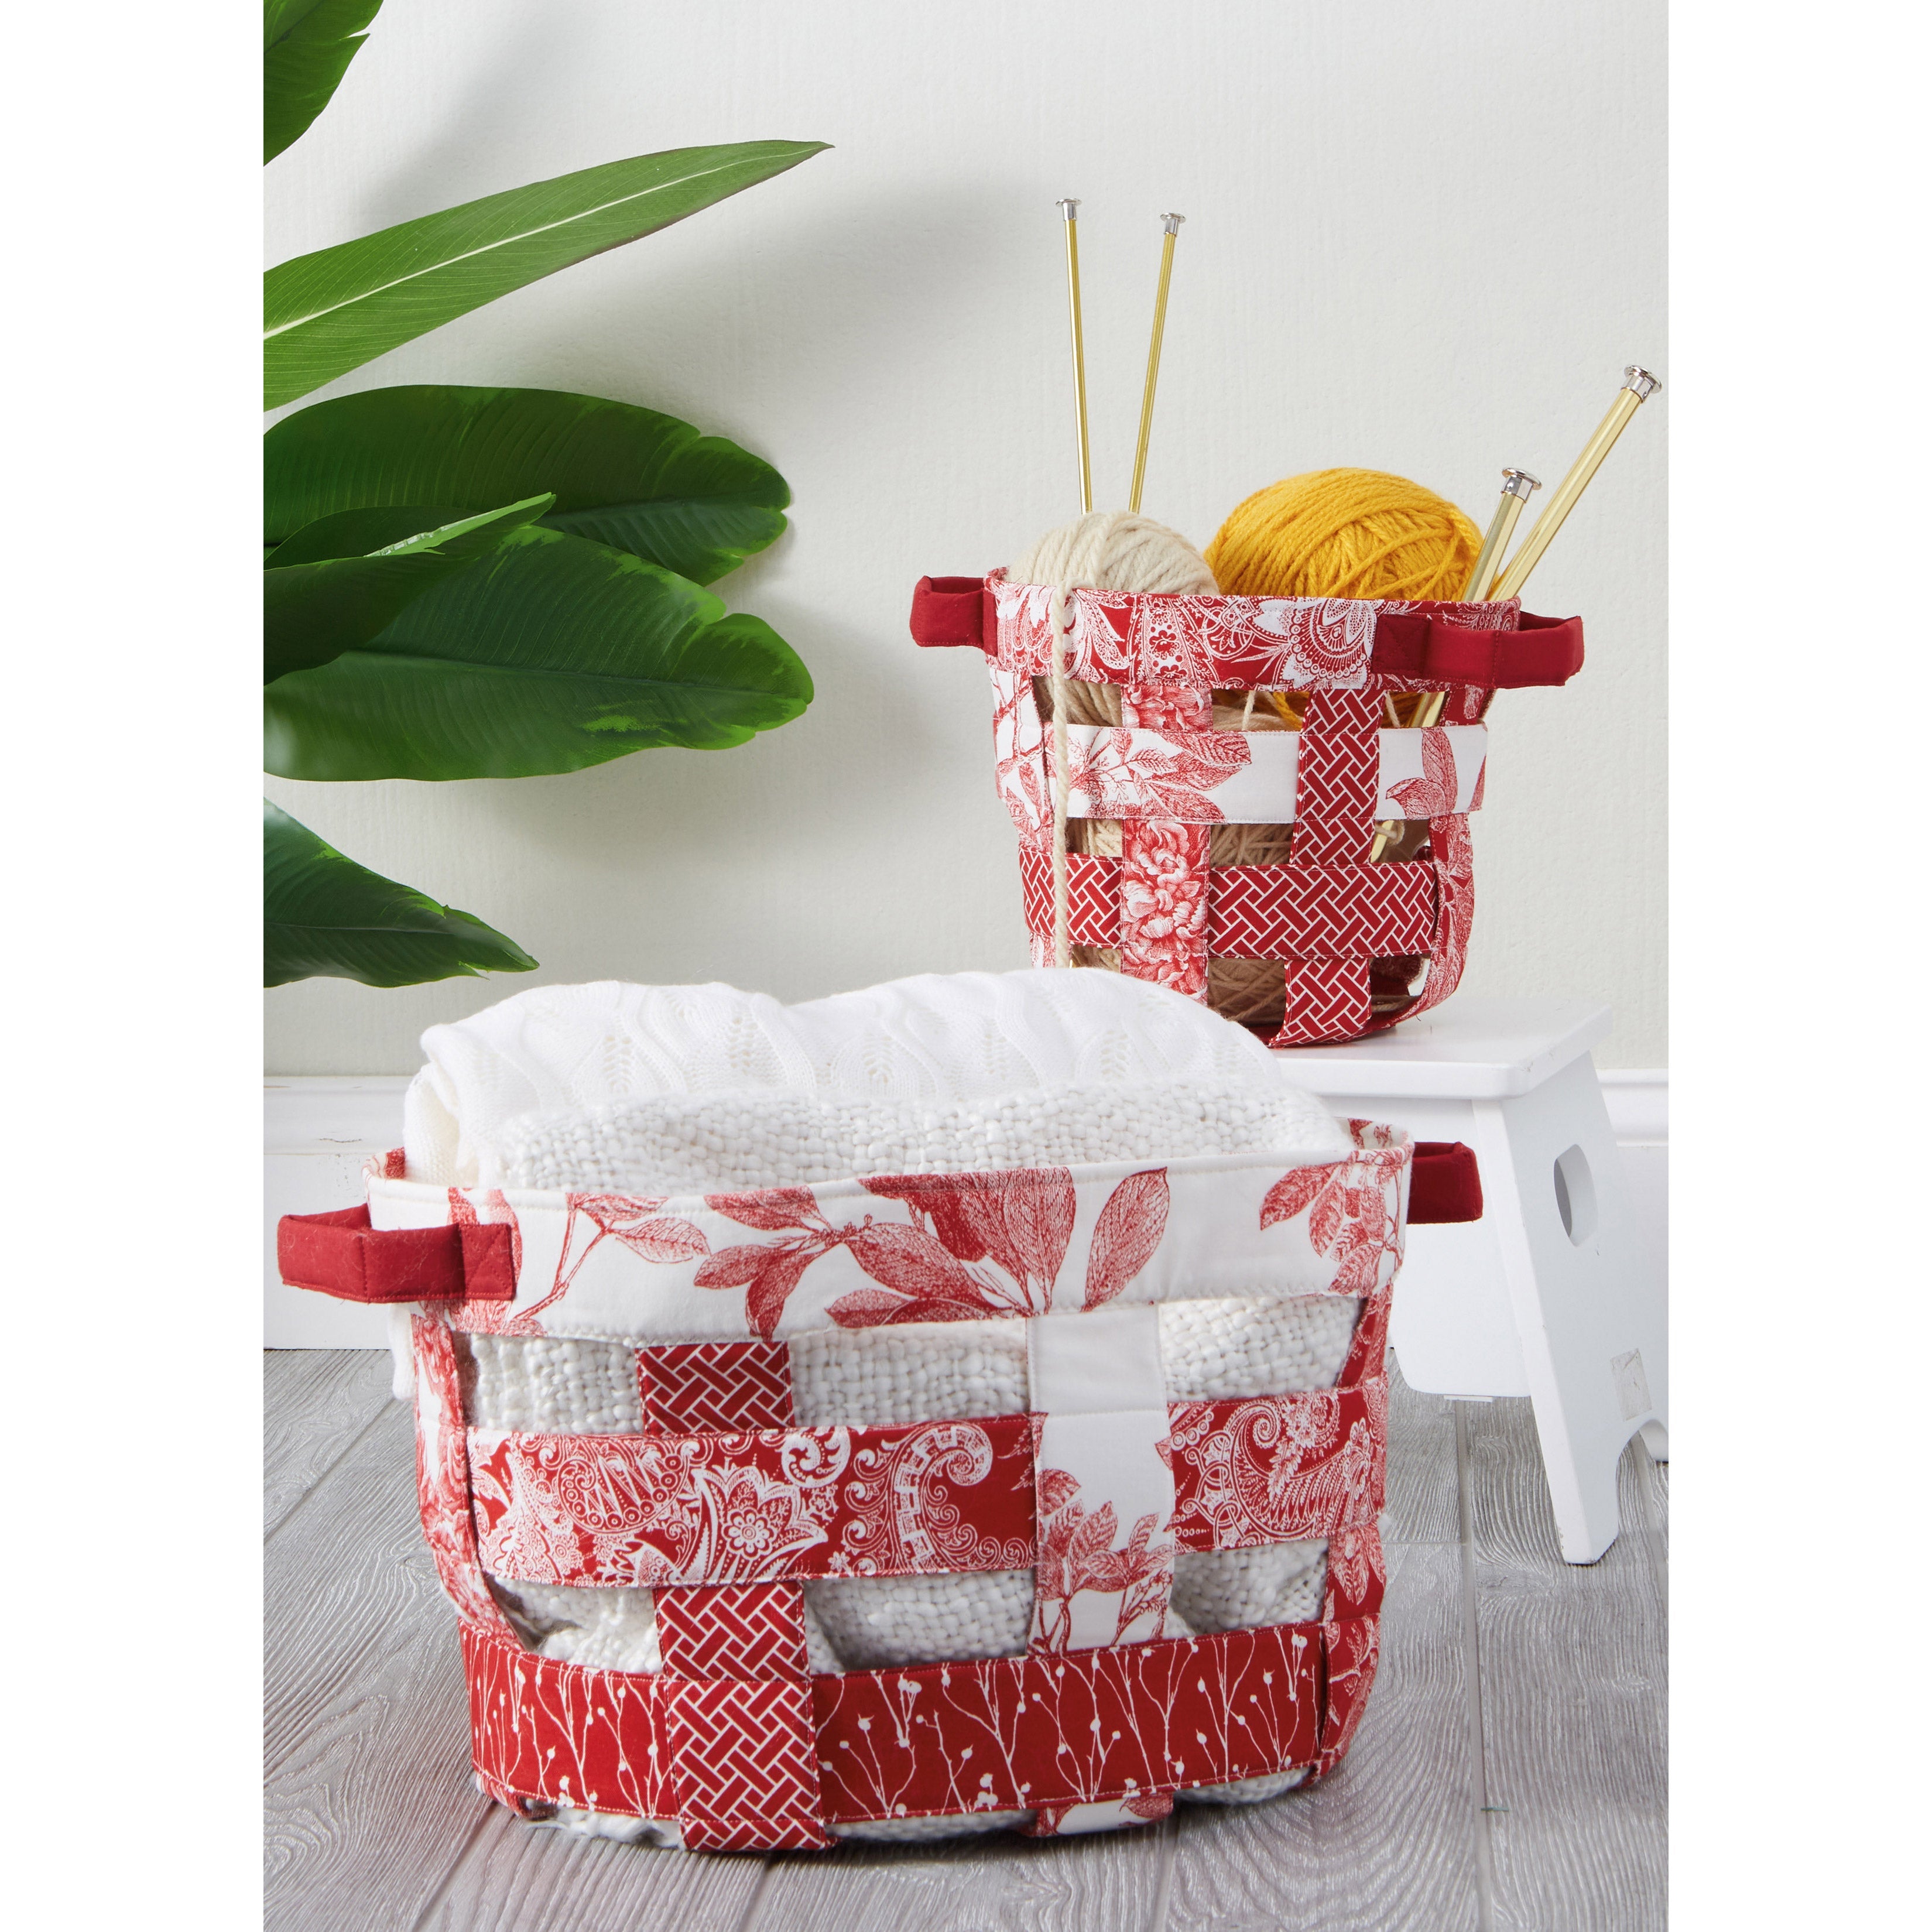 Simplicity sewing pattern 9623 Fabric Baskets by Carla Reiss Design from Jaycotts Sewing Supplies